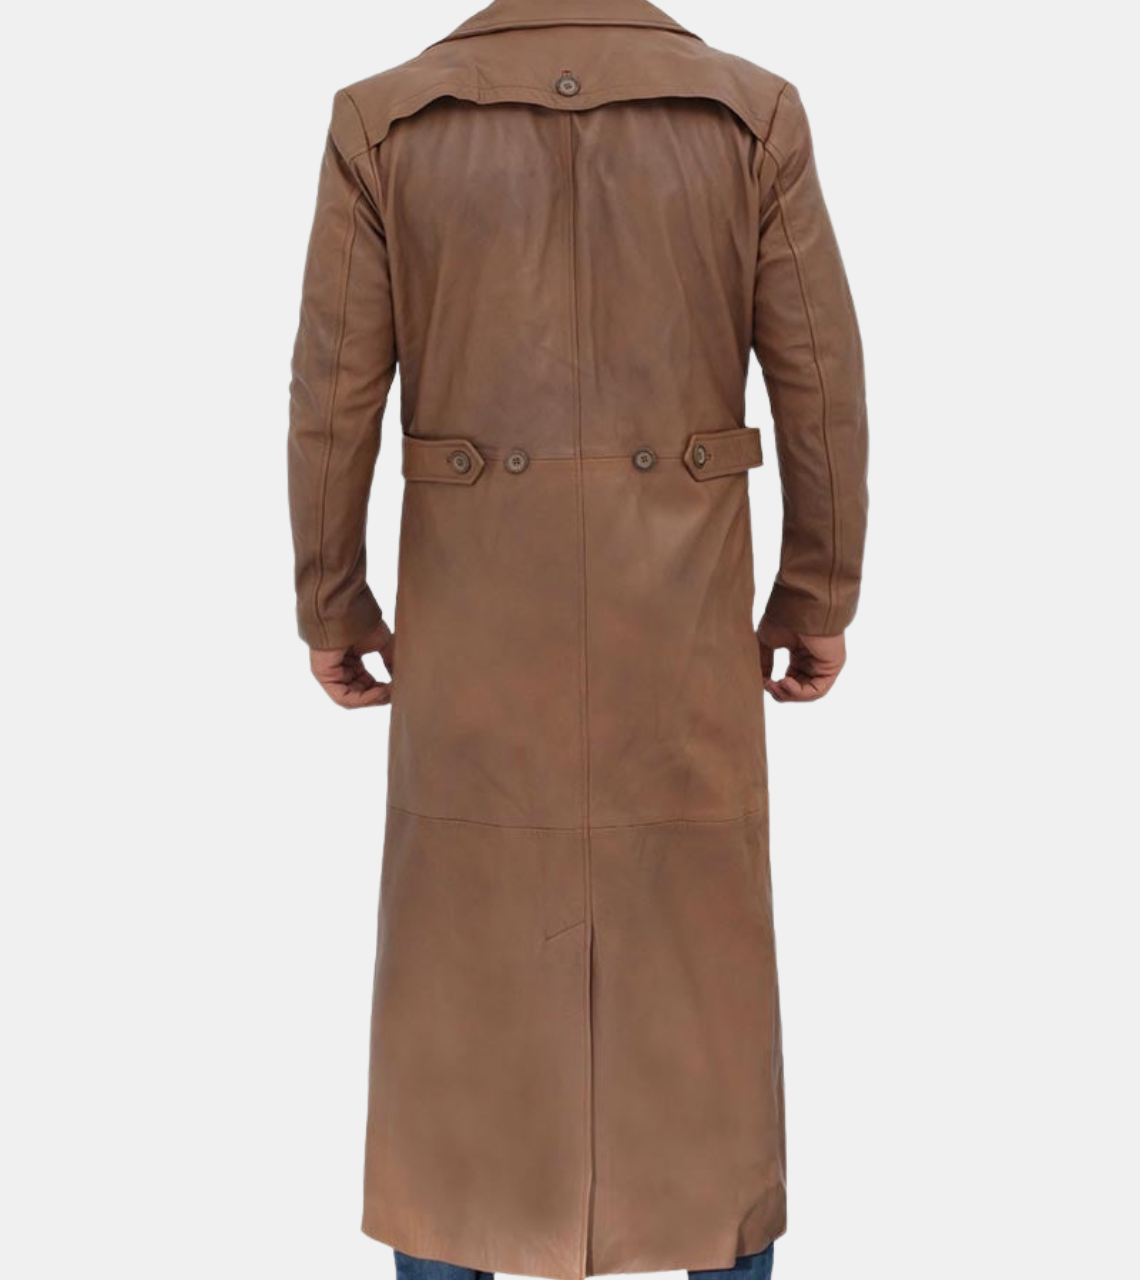 Rier Men's Tan Brown Leather Trench Coat Back